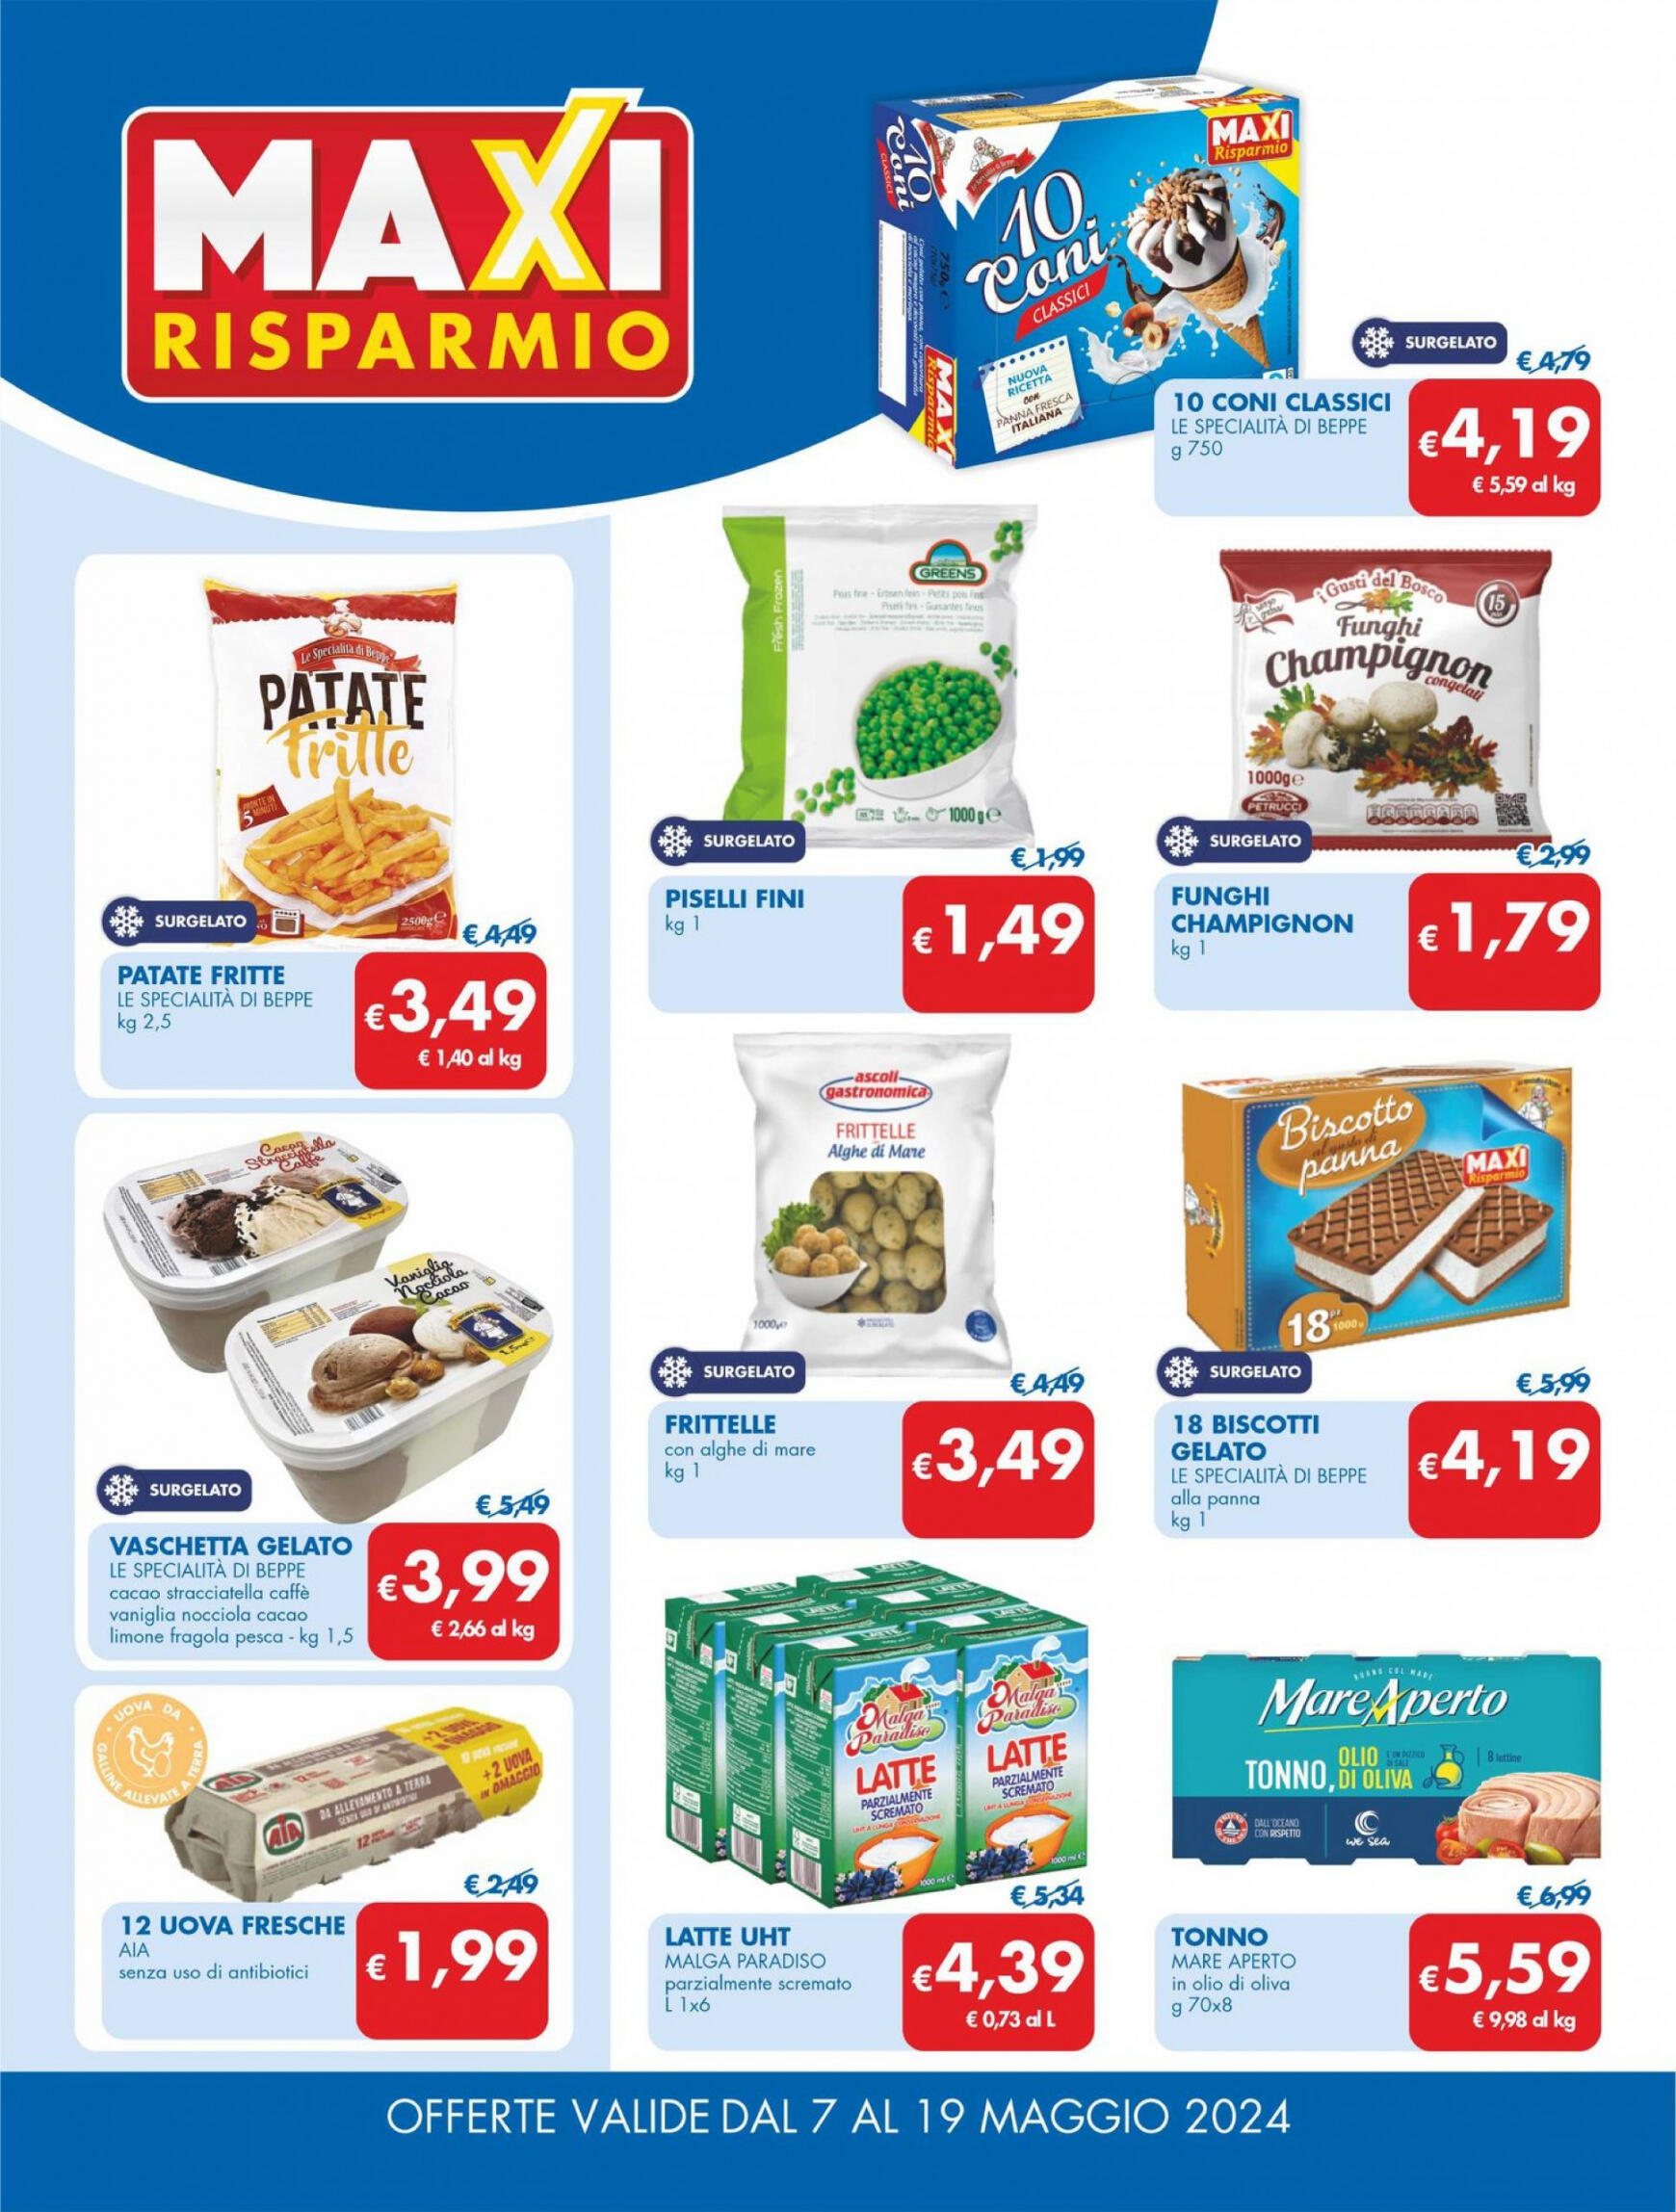 md-discount - Nuovo volantino MD - MD Discount 07.05. - 19.05. - page: 3